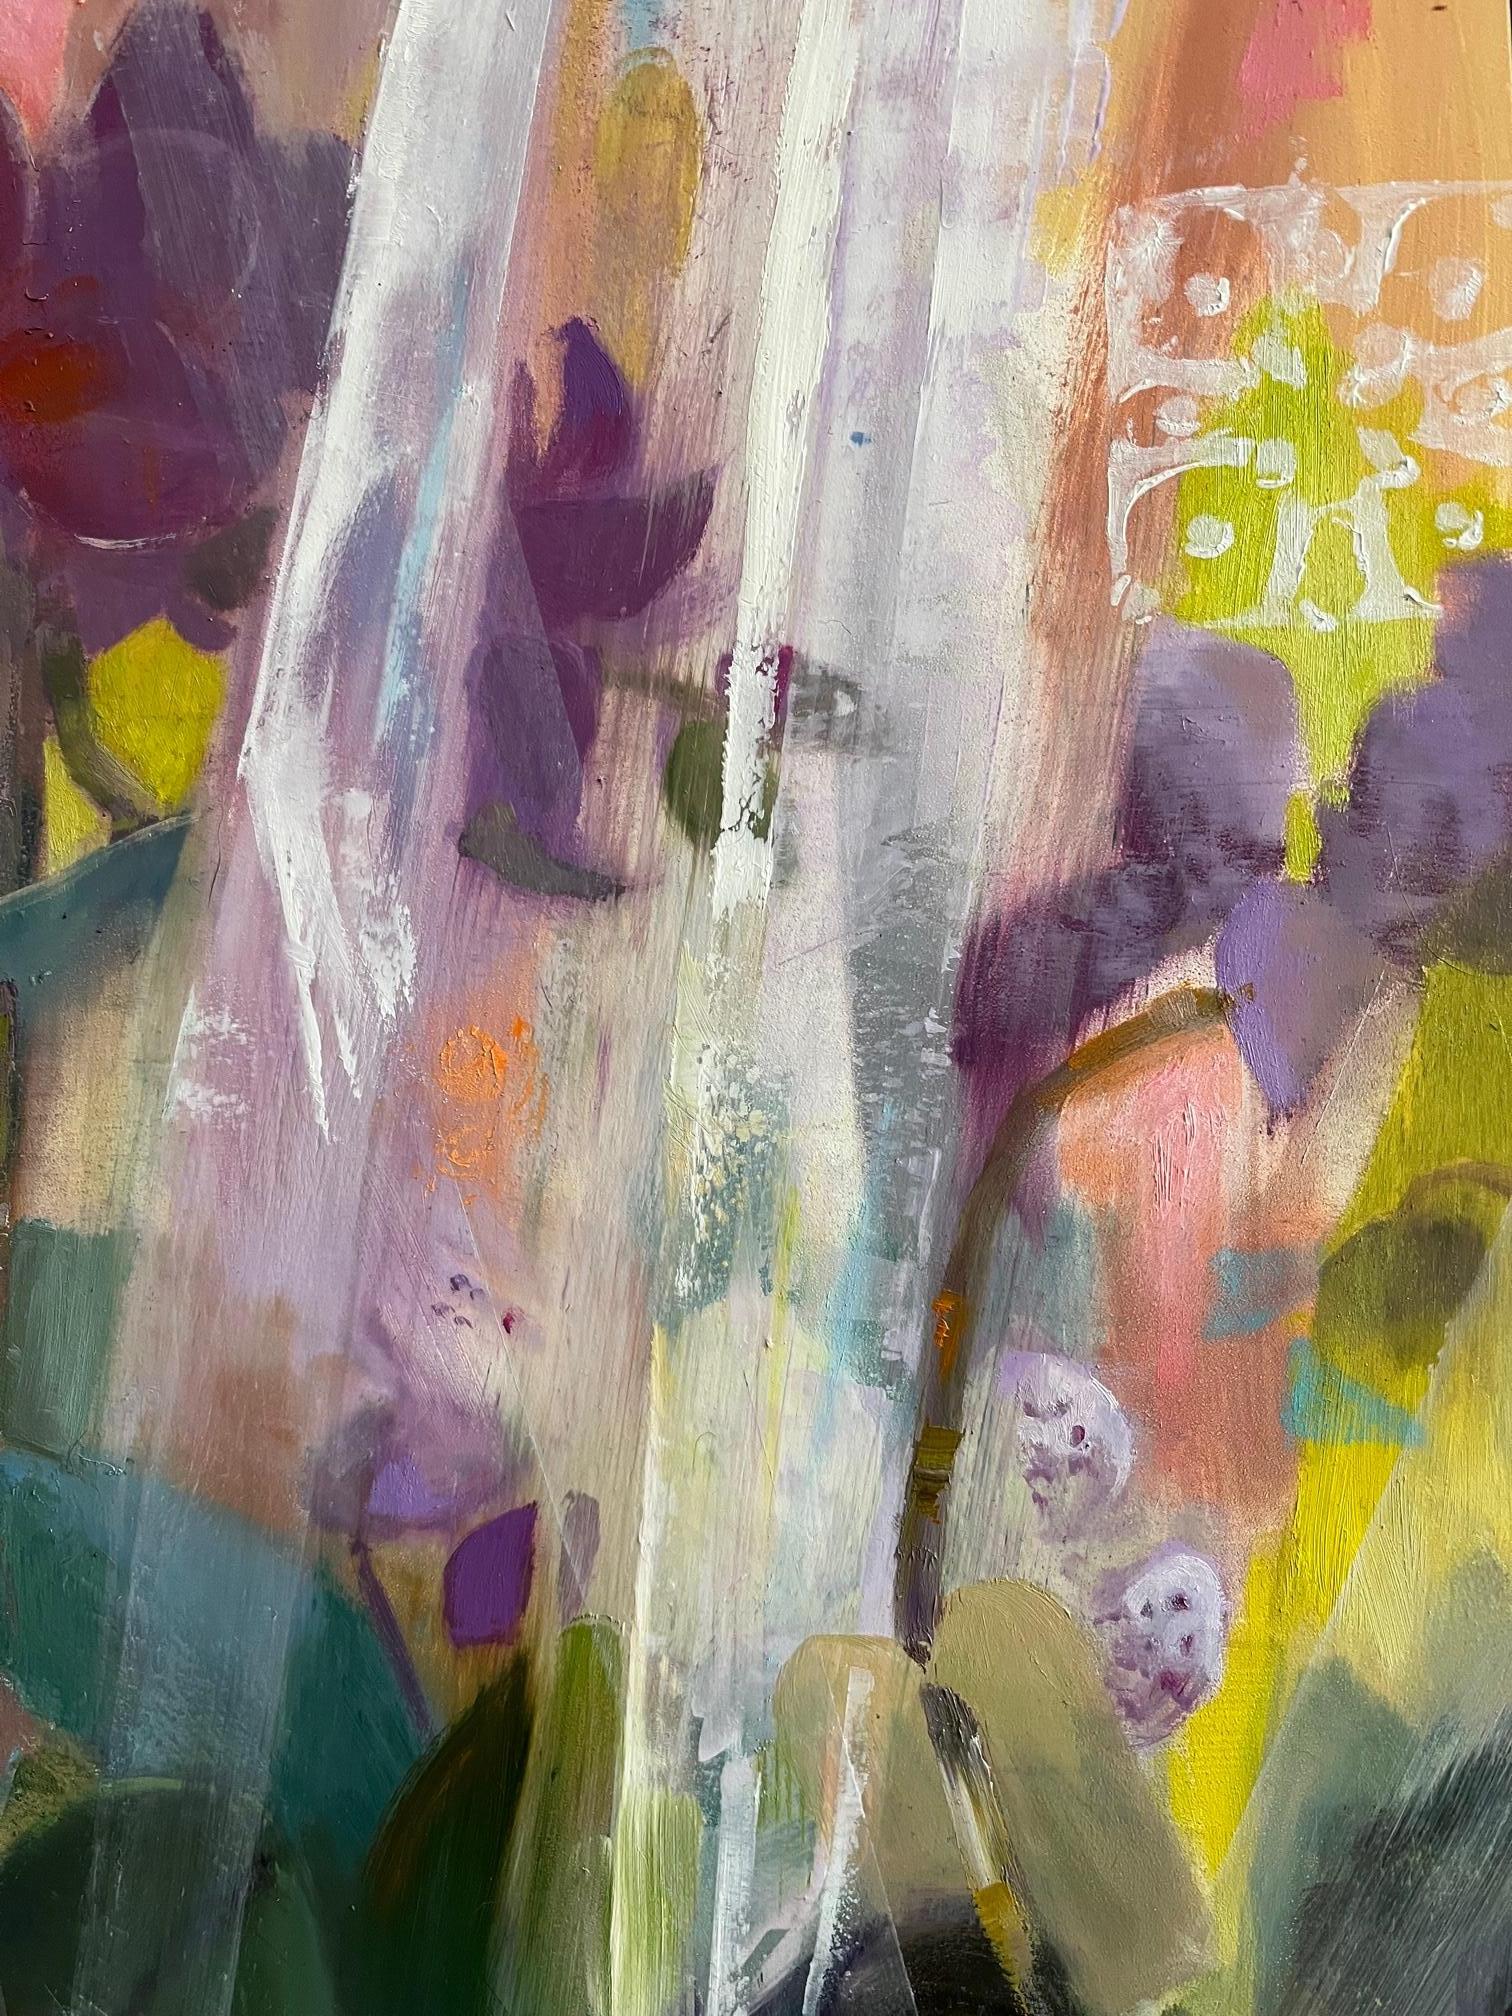 Everyday life is full of surprises, and artist Carole Garland uncovers and discovers delight in the cellophane wrapped orchids at Trader Joe’s.  The cellophane reflects the sunlight and creates a diaphanous scrim of mystery surrounding the fragile